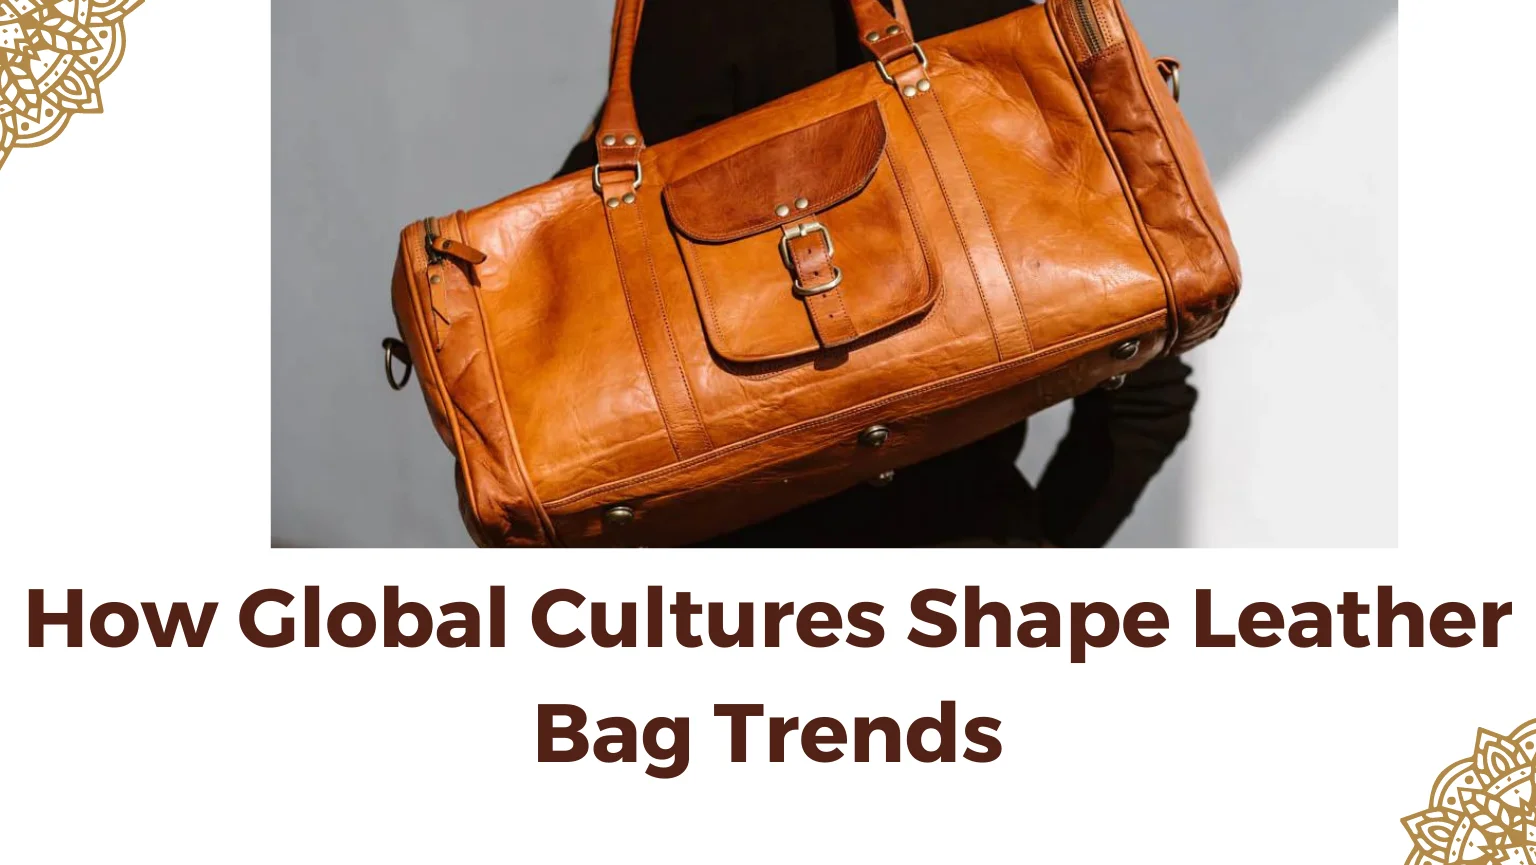 How Global Cultures Shape Leather Bag Trends